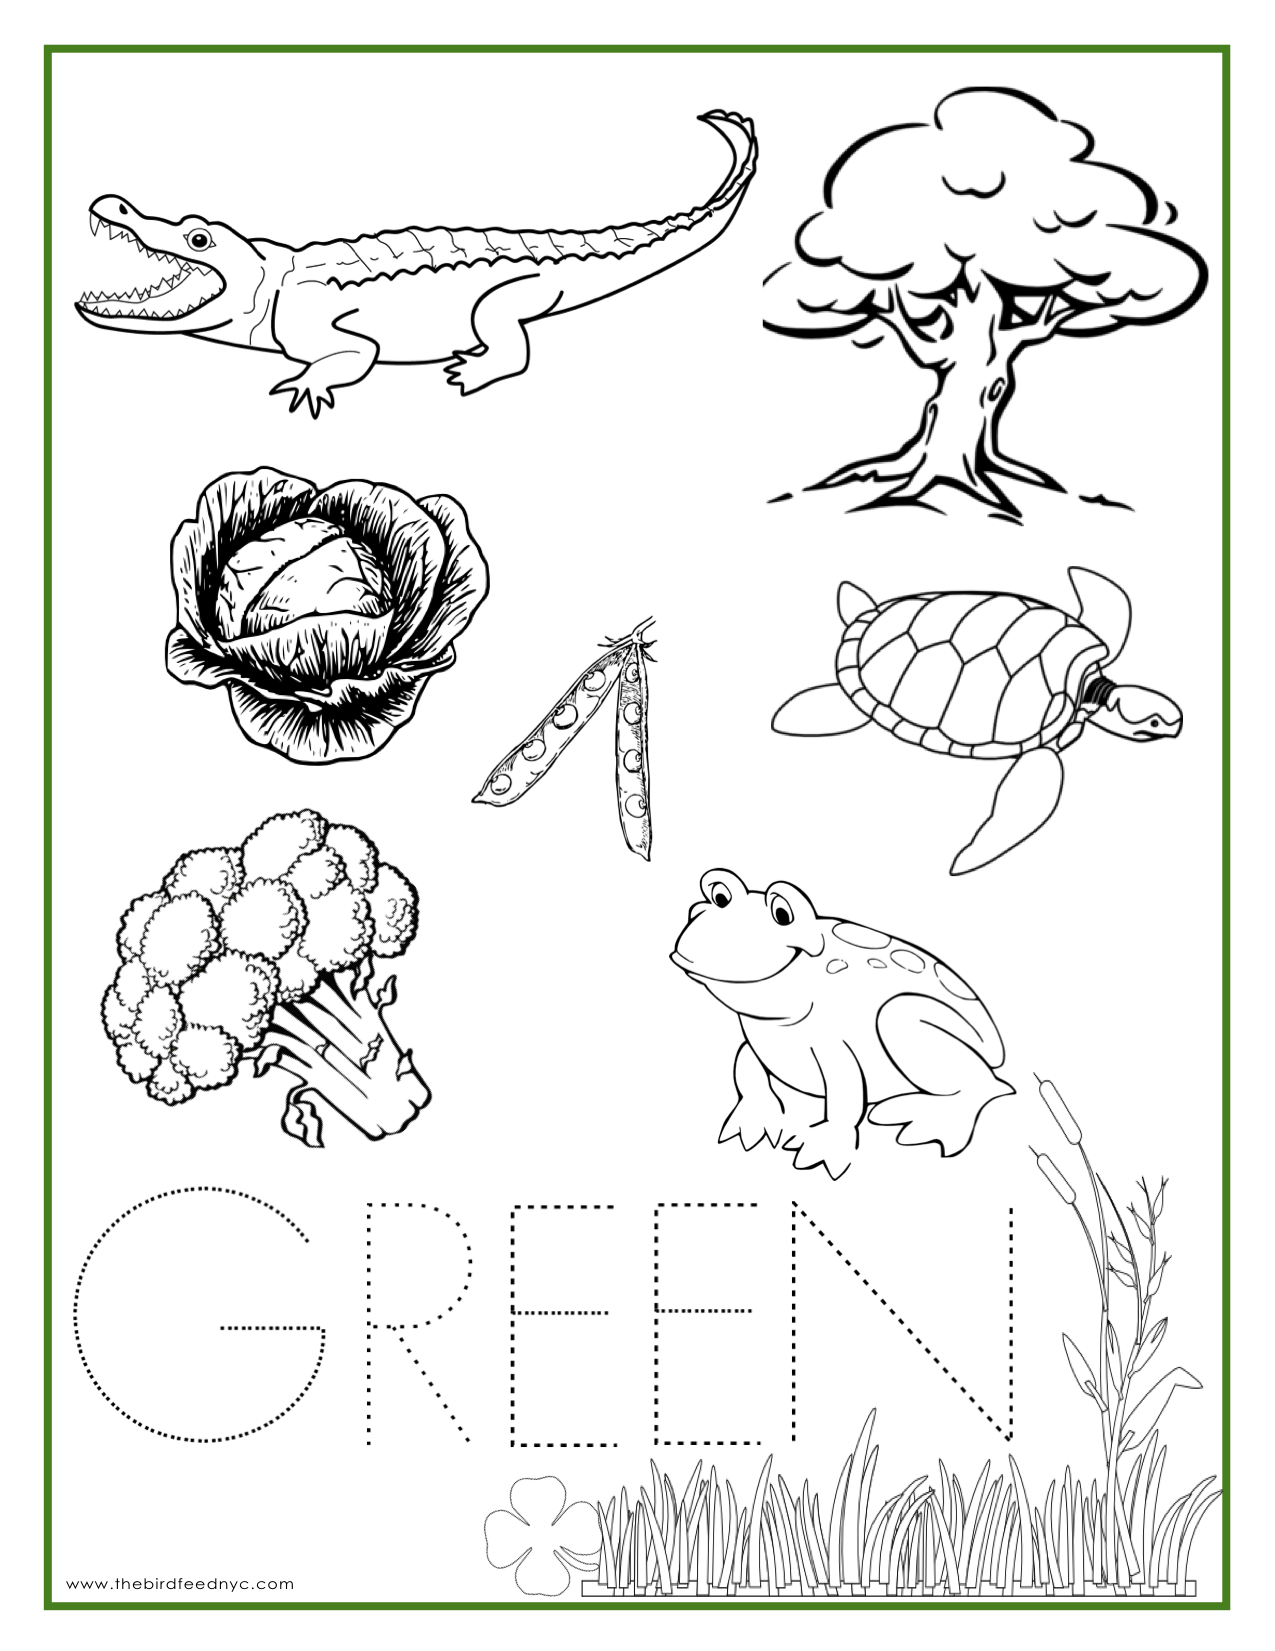 5 Best Images of Printable Coloring Activity Sheets - Frozen ...